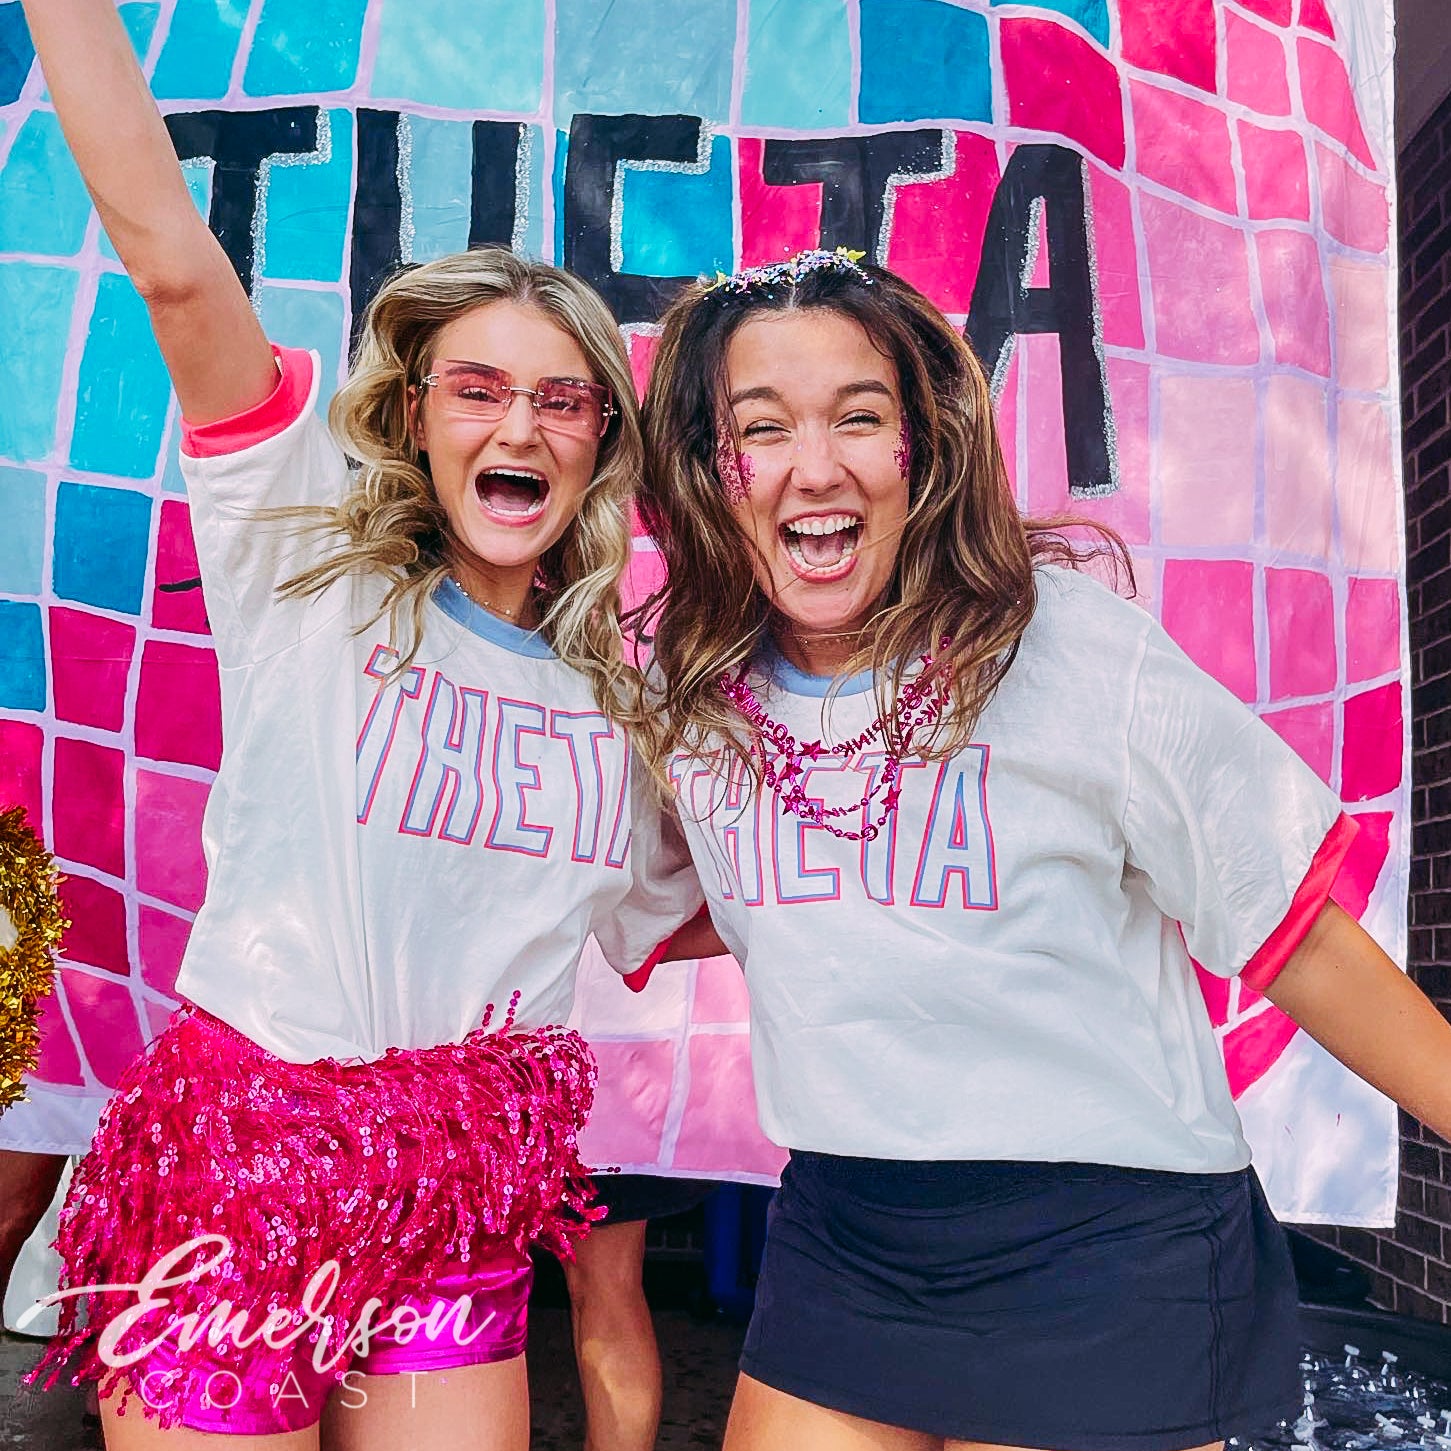 picture is of 2 girls wearing white ringer tshirts that say Theta in pink and blue font